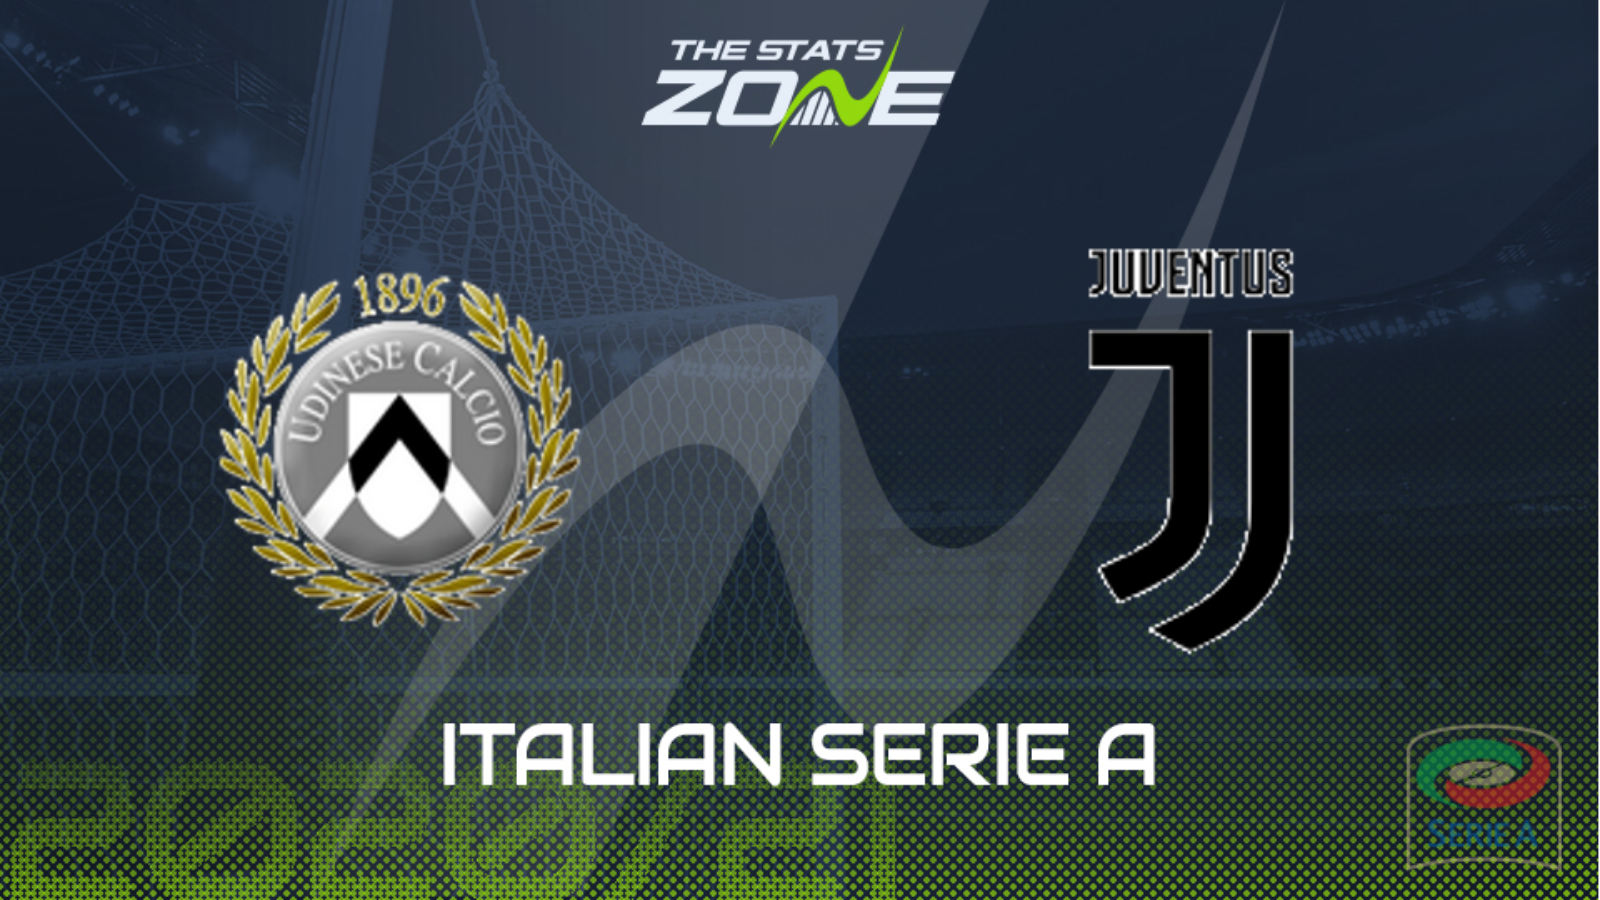 Udinese vs Juventus Full Match – Serie A 2020/21